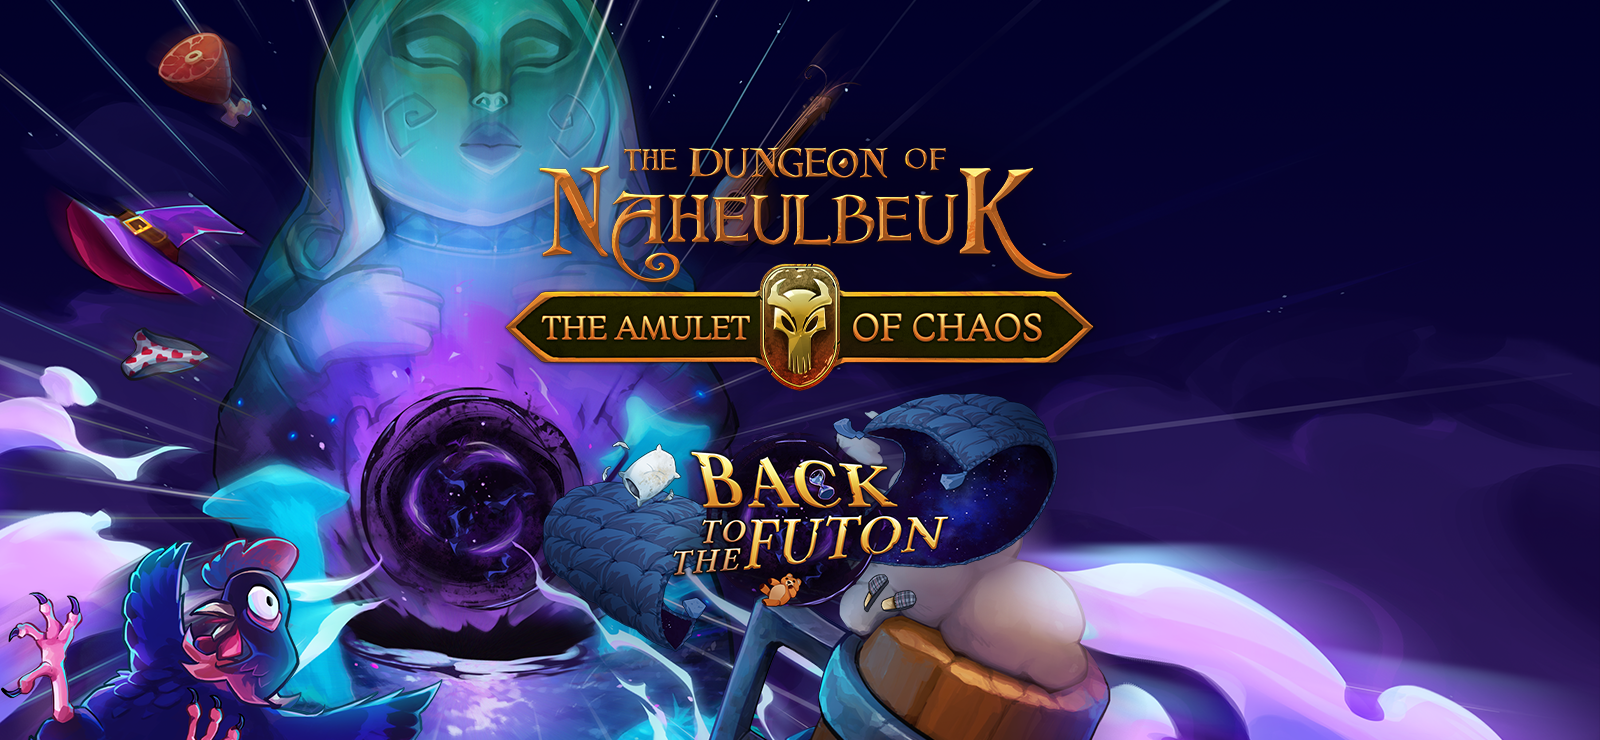 The Dungeon Of Naheulbeuk: Back To The Futon